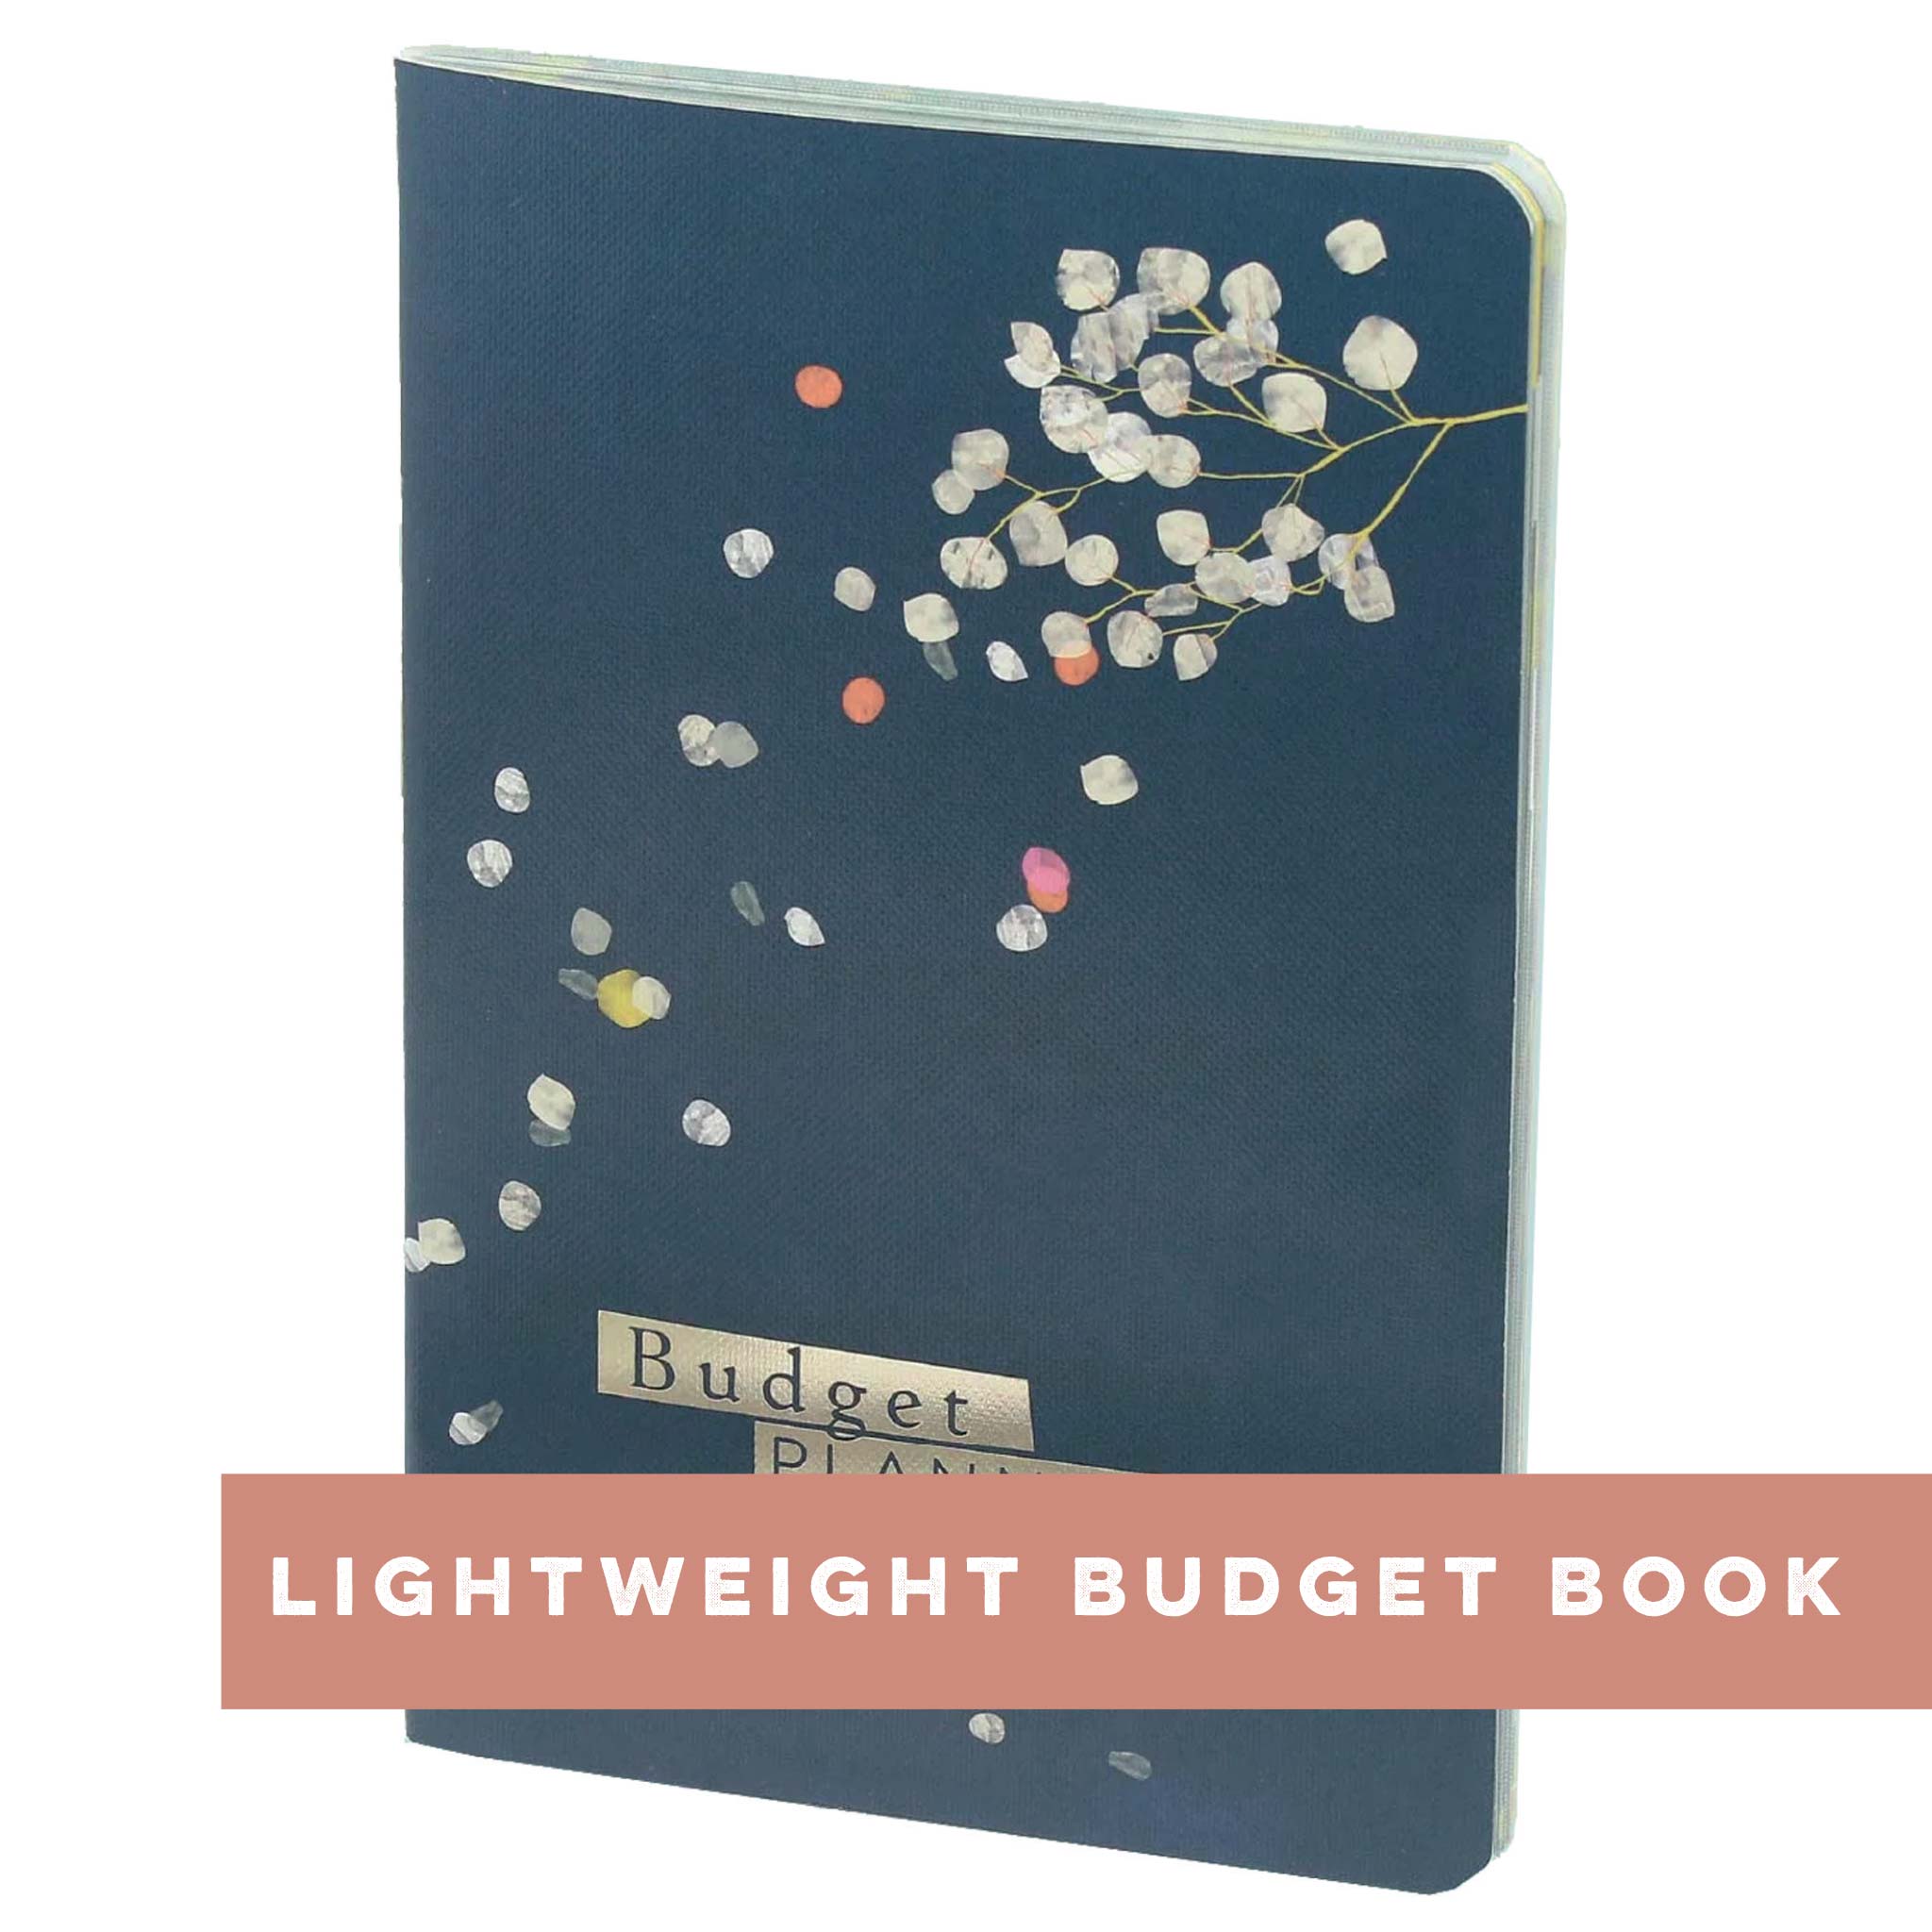 An image of Lightweight Budget Book | Budget Planner | Boxclever Press